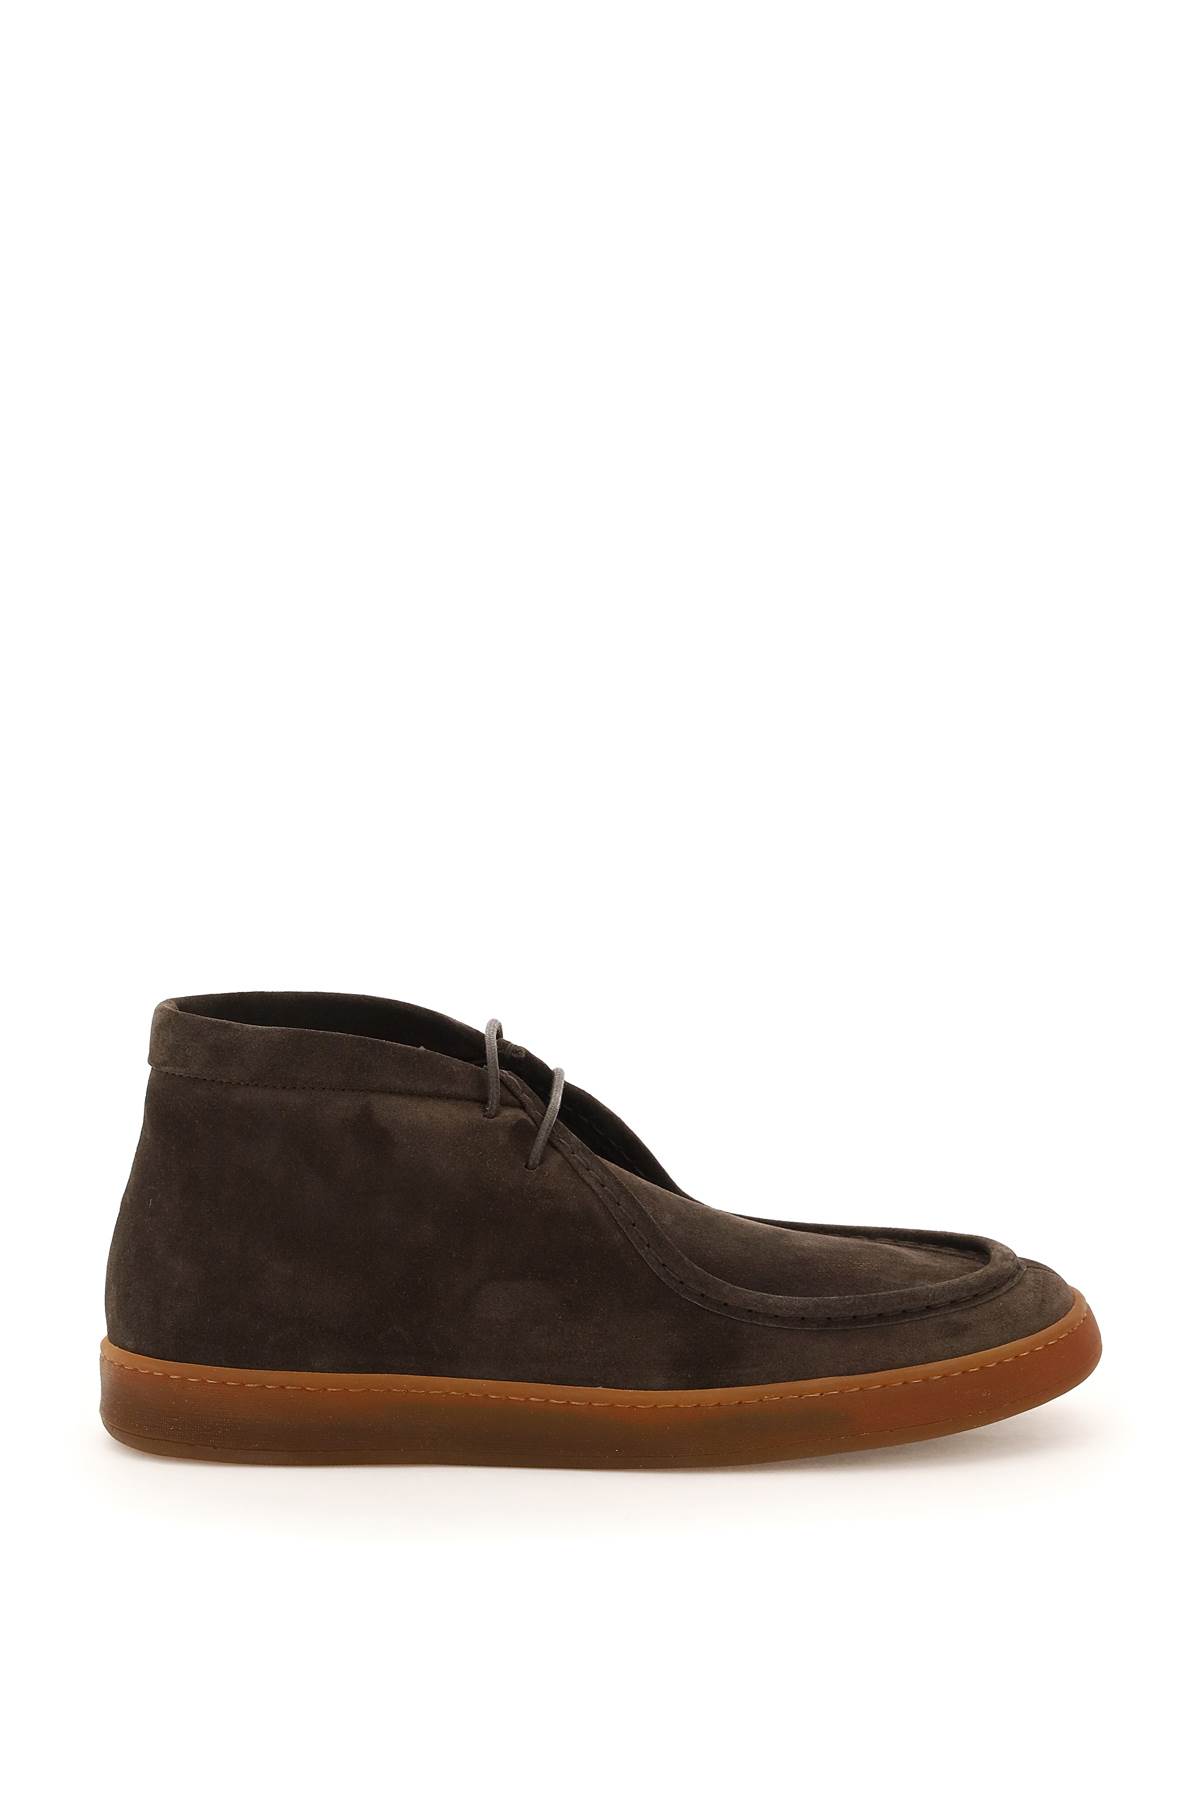 Henderson Baracco Suede Leather Bastien Lace-up Shoes